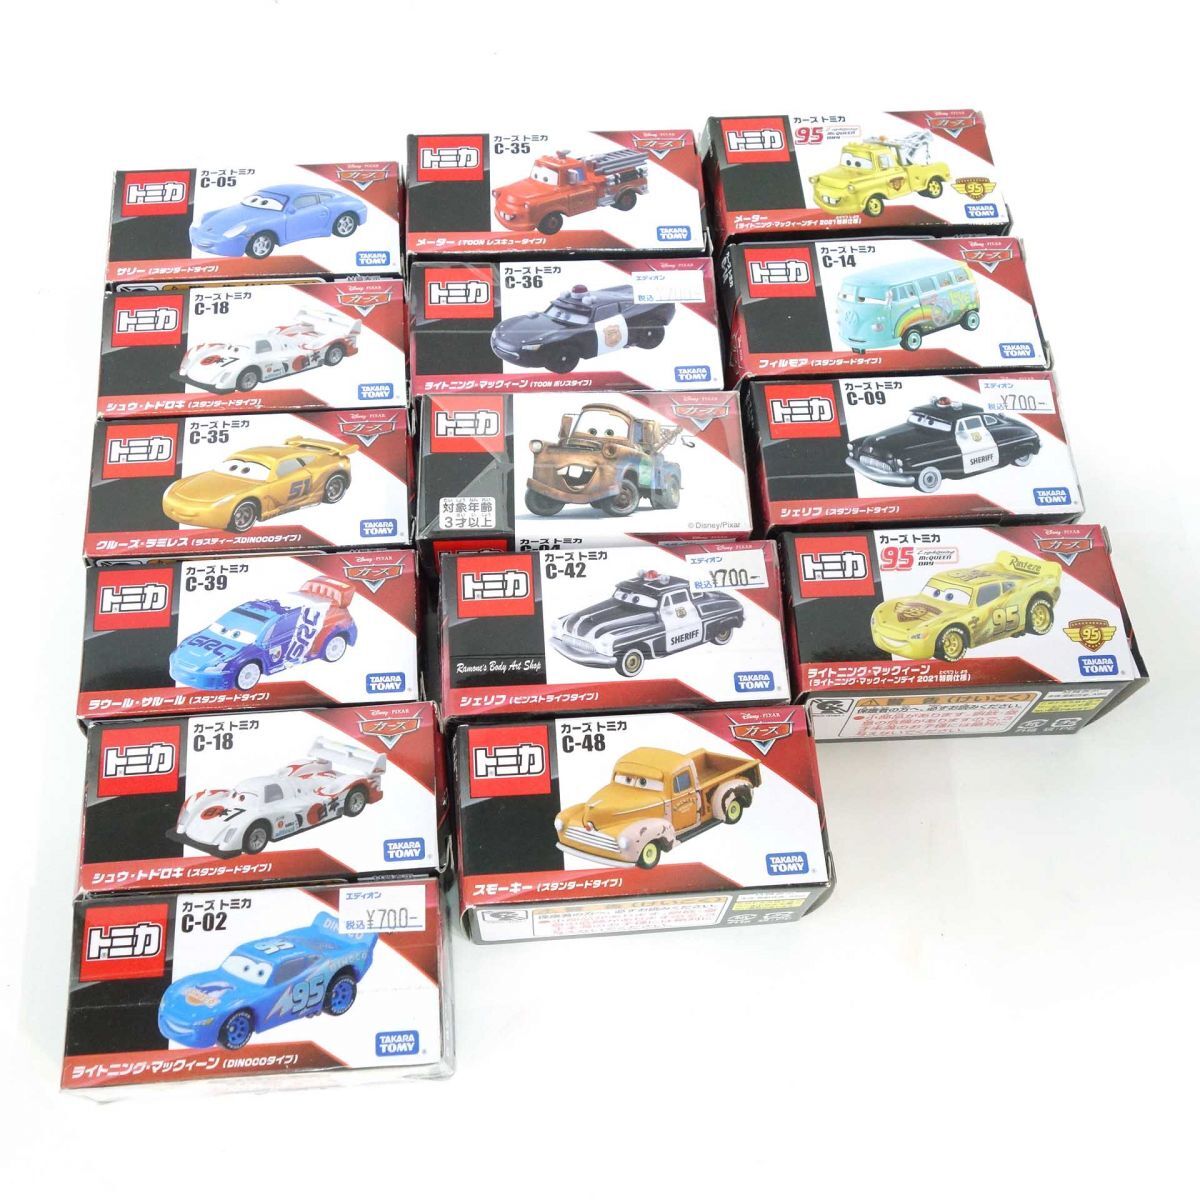 074 Tomica The Cars lightning * Mac .-n cruise *lami less etc. 15 point set summarize unopened equipped * Junk 